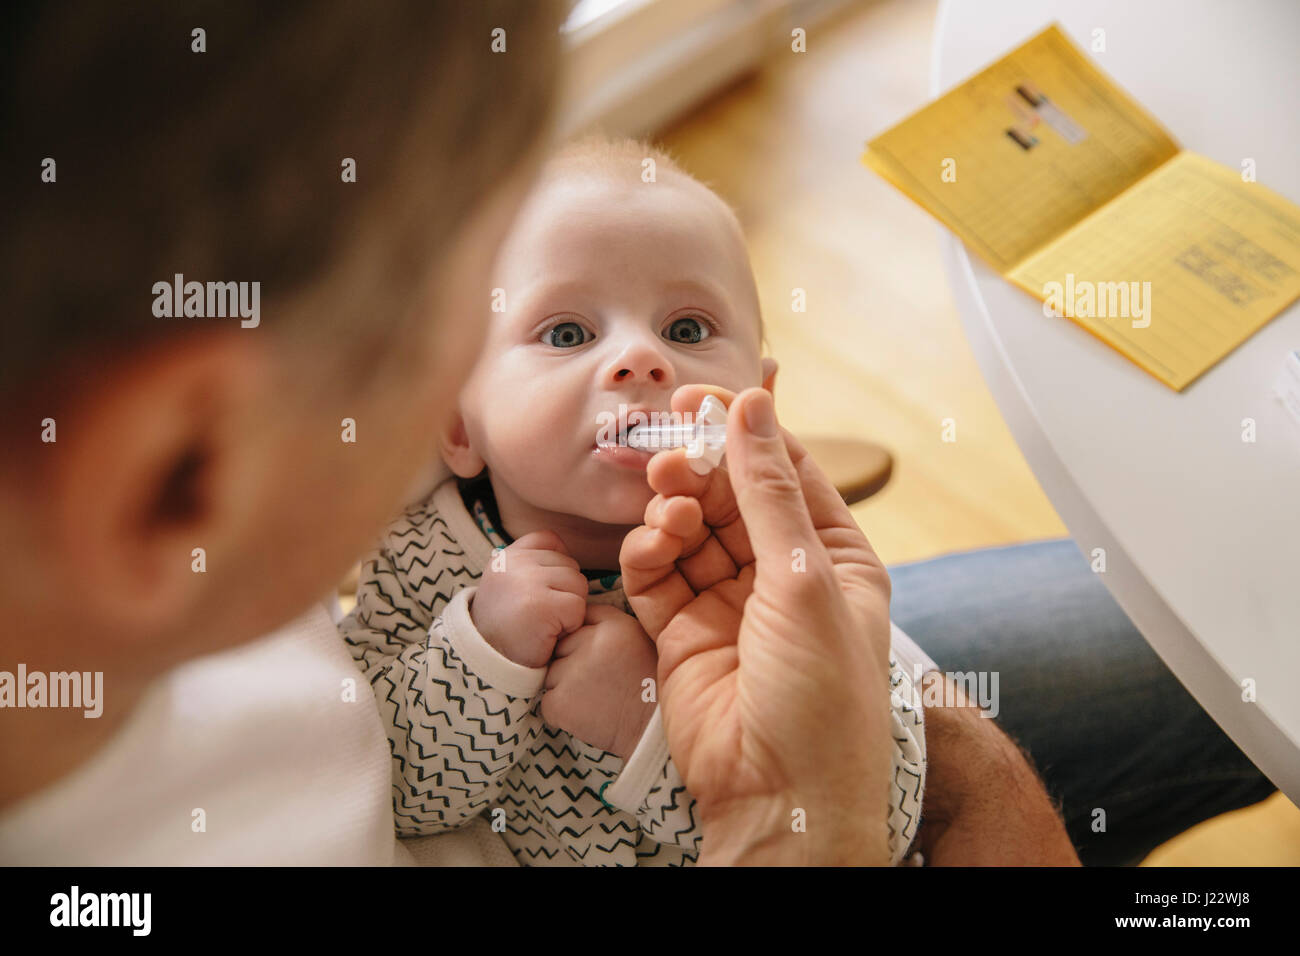 Three-month-old baby receiving oral vaccination Stock Photo